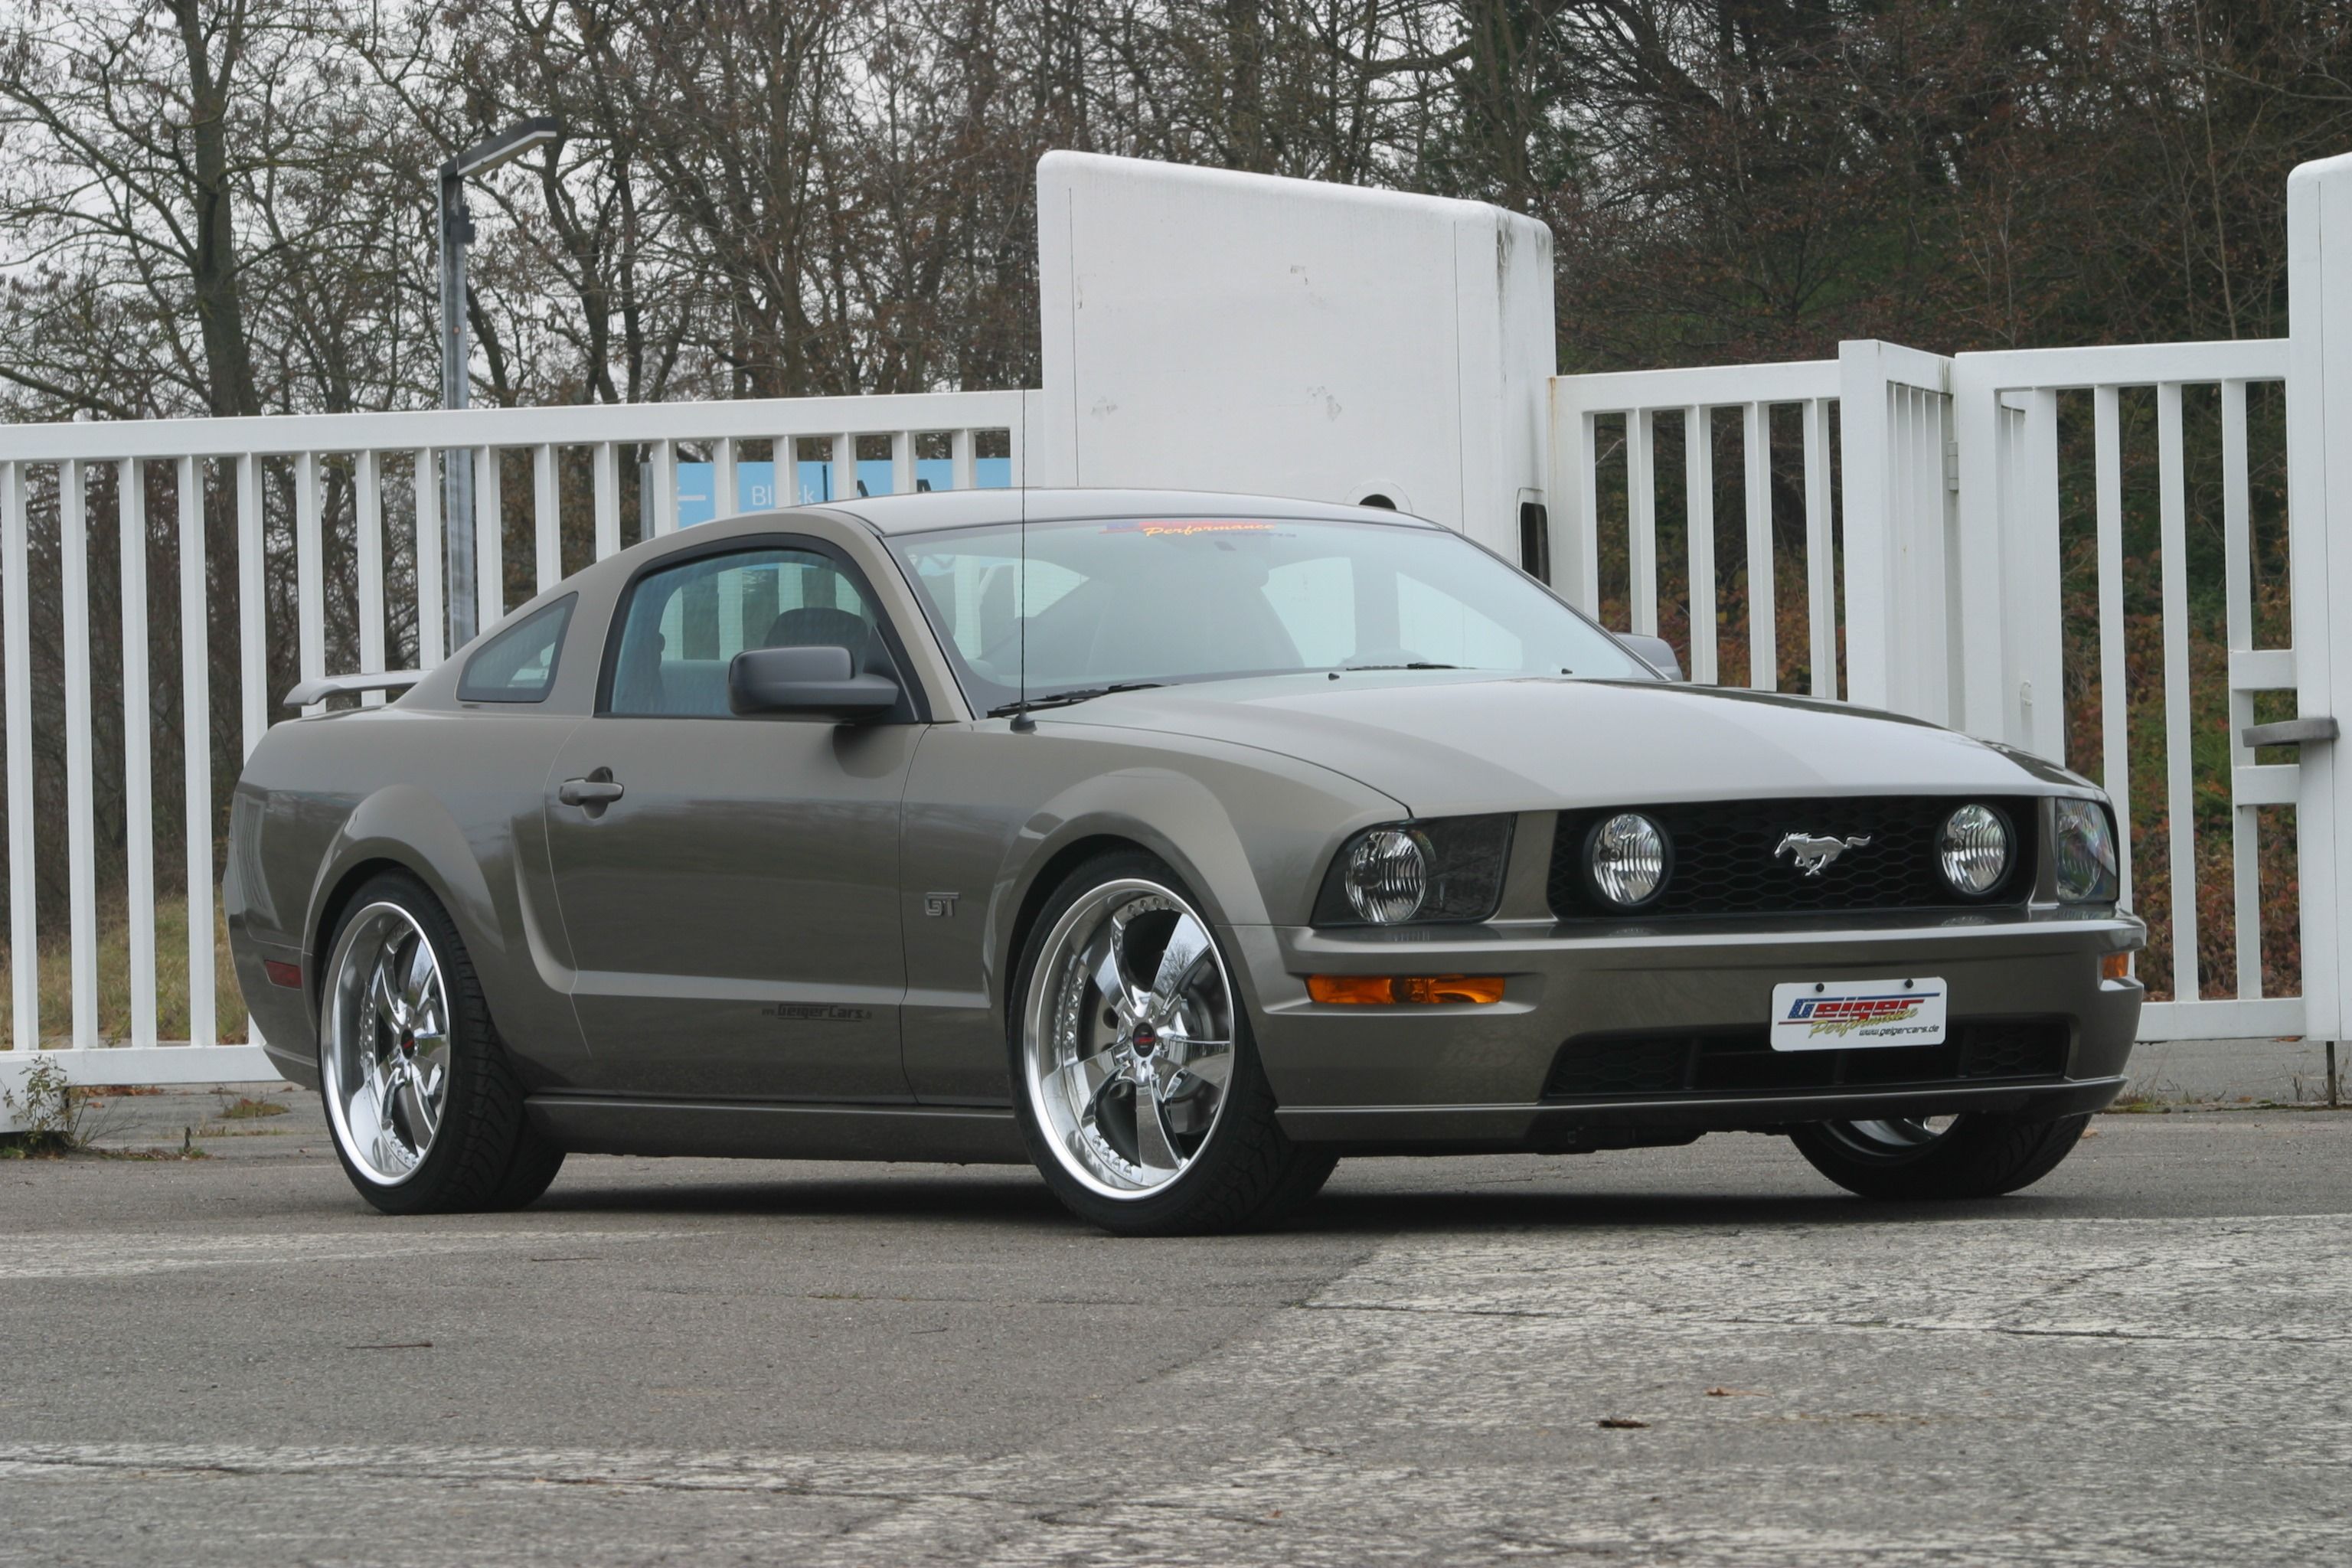 2006 Geigercars Mustang